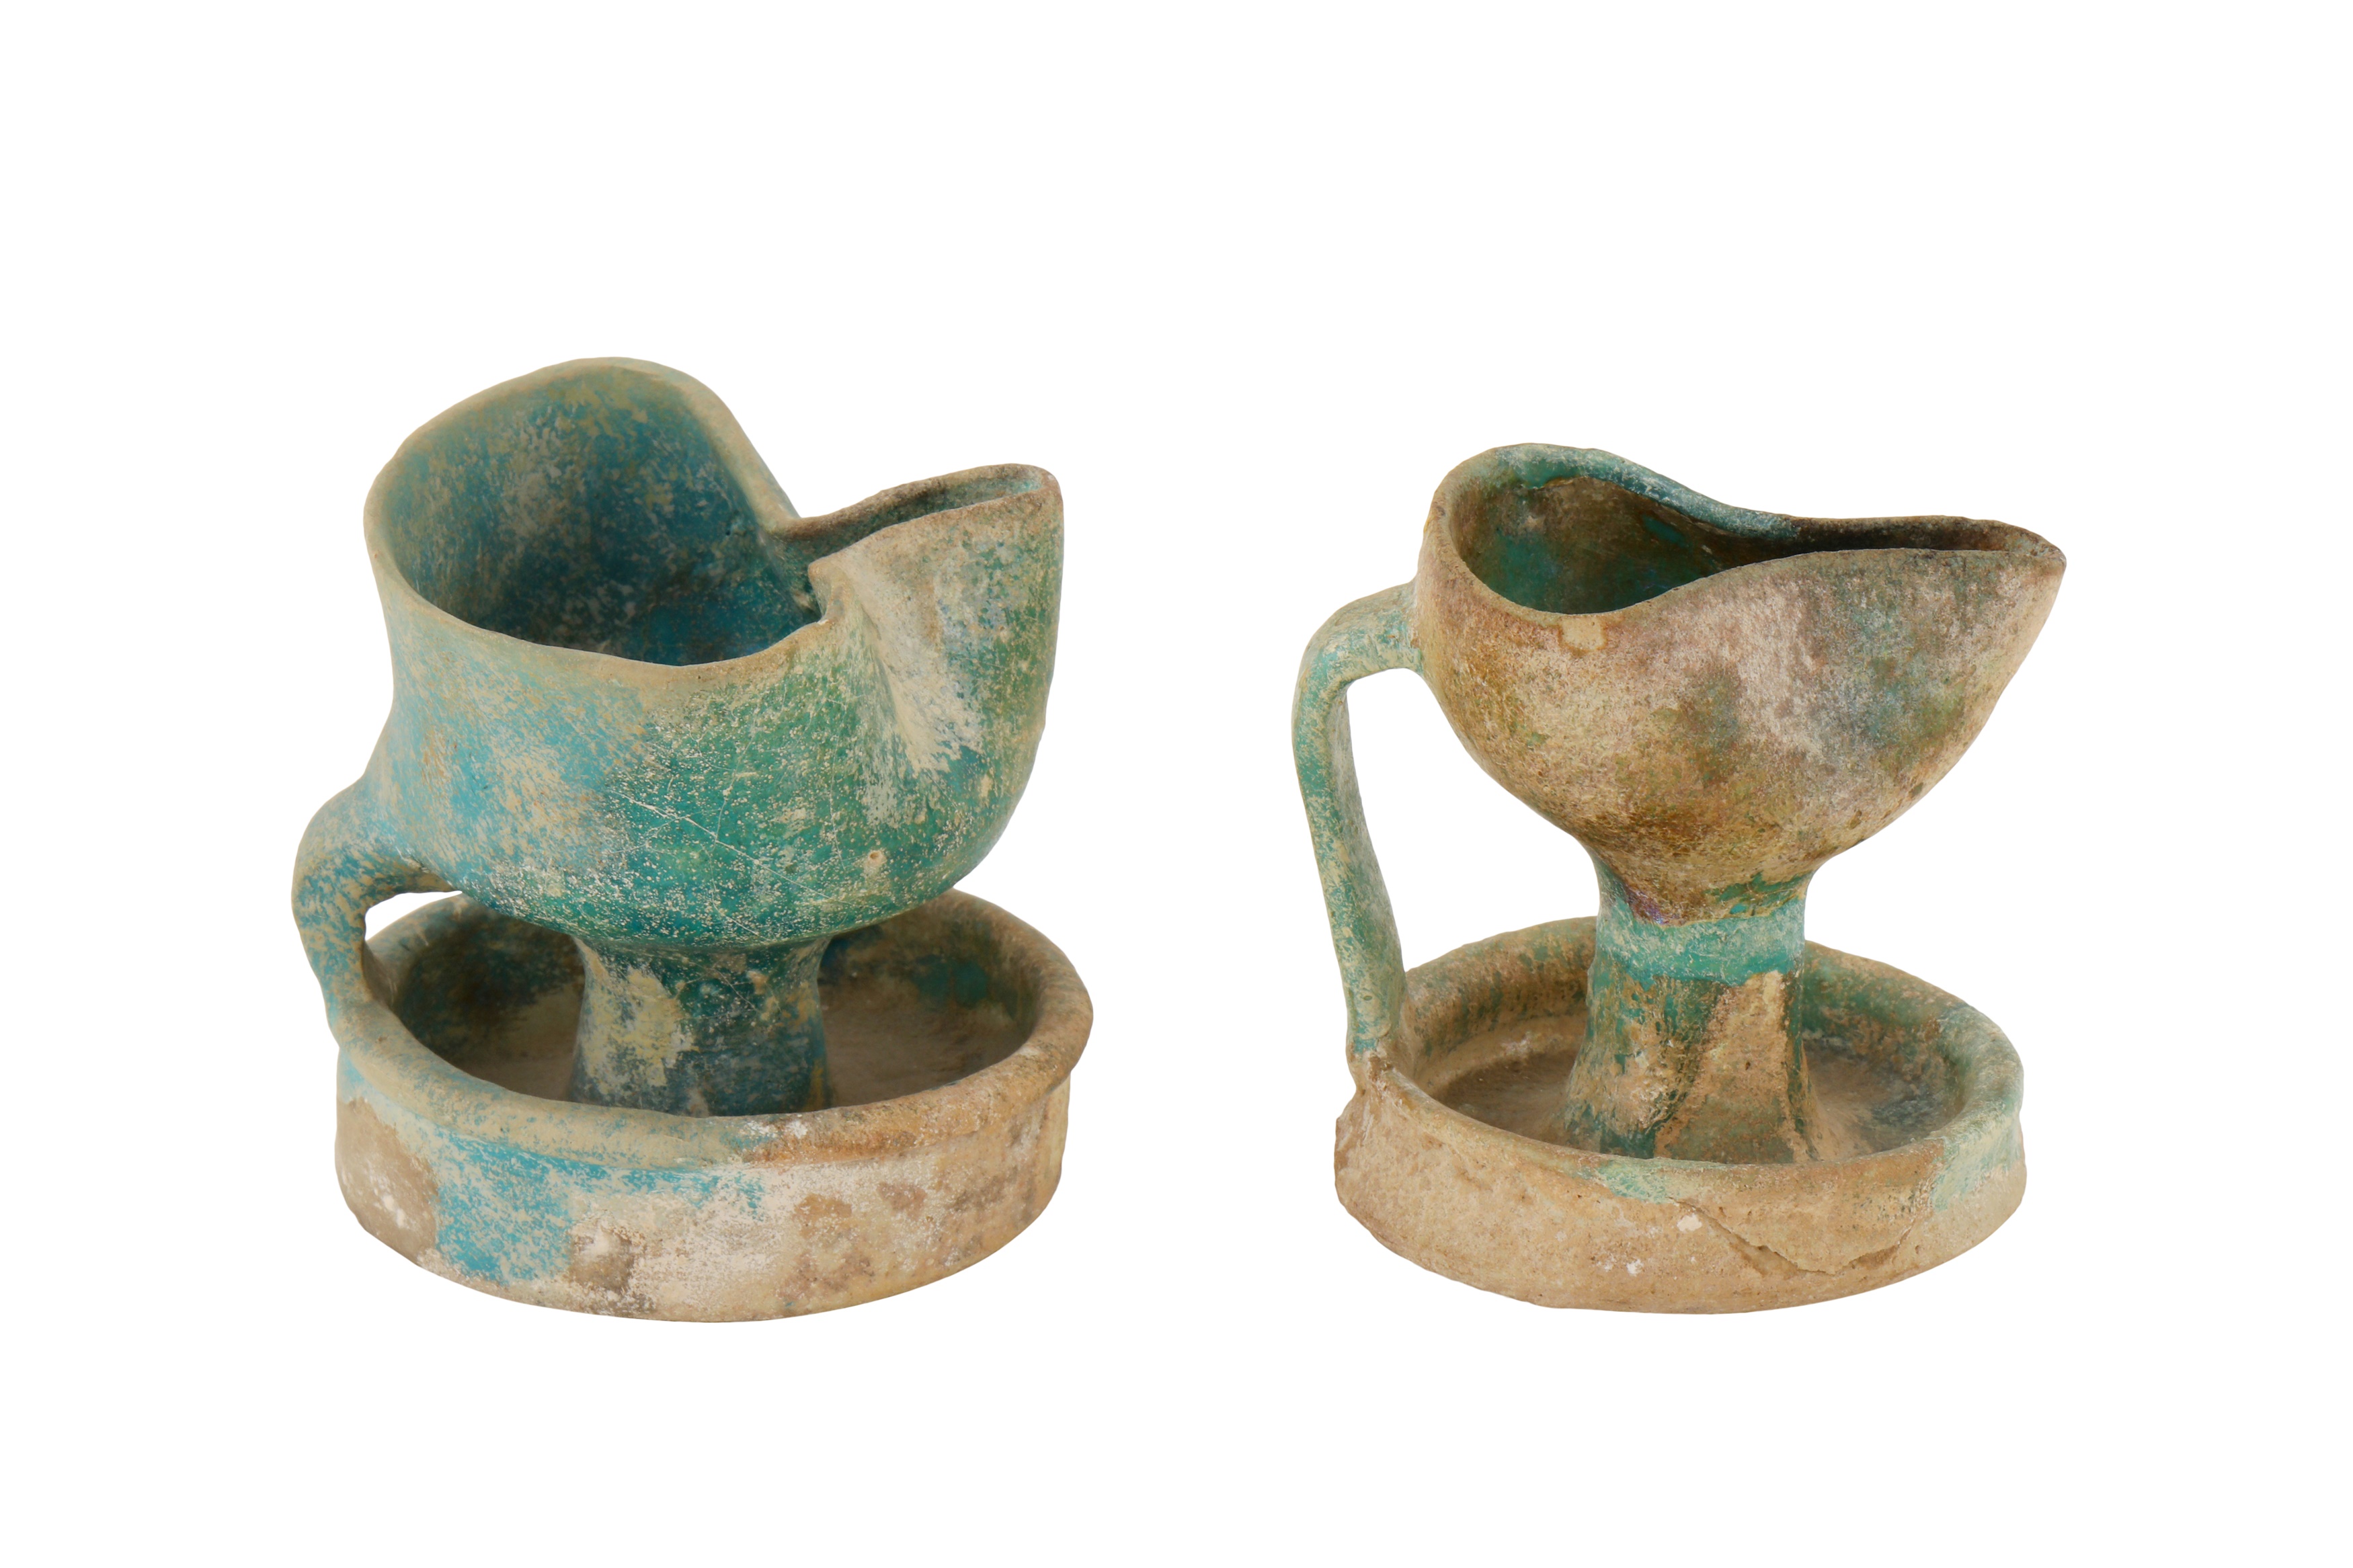 TWO 12TH-13TH CENTURY ANDALUSIAN SPANISH ALMOHAD TURQUOISE GLAZED OIL LAMPS - Image 3 of 3